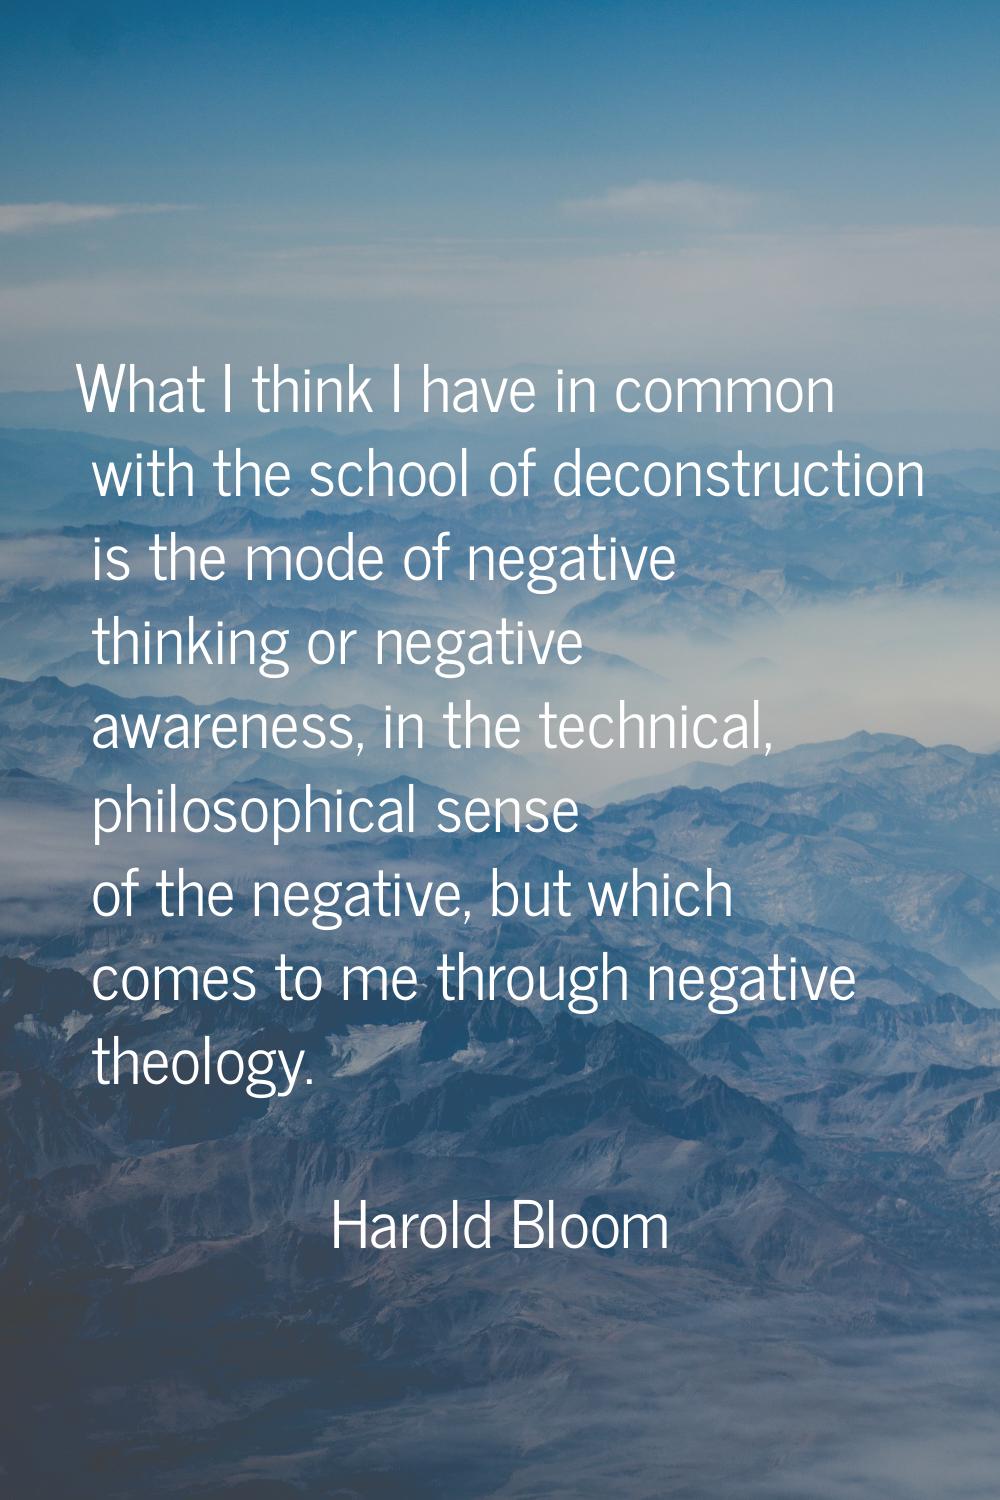 What I think I have in common with the school of deconstruction is the mode of negative thinking or